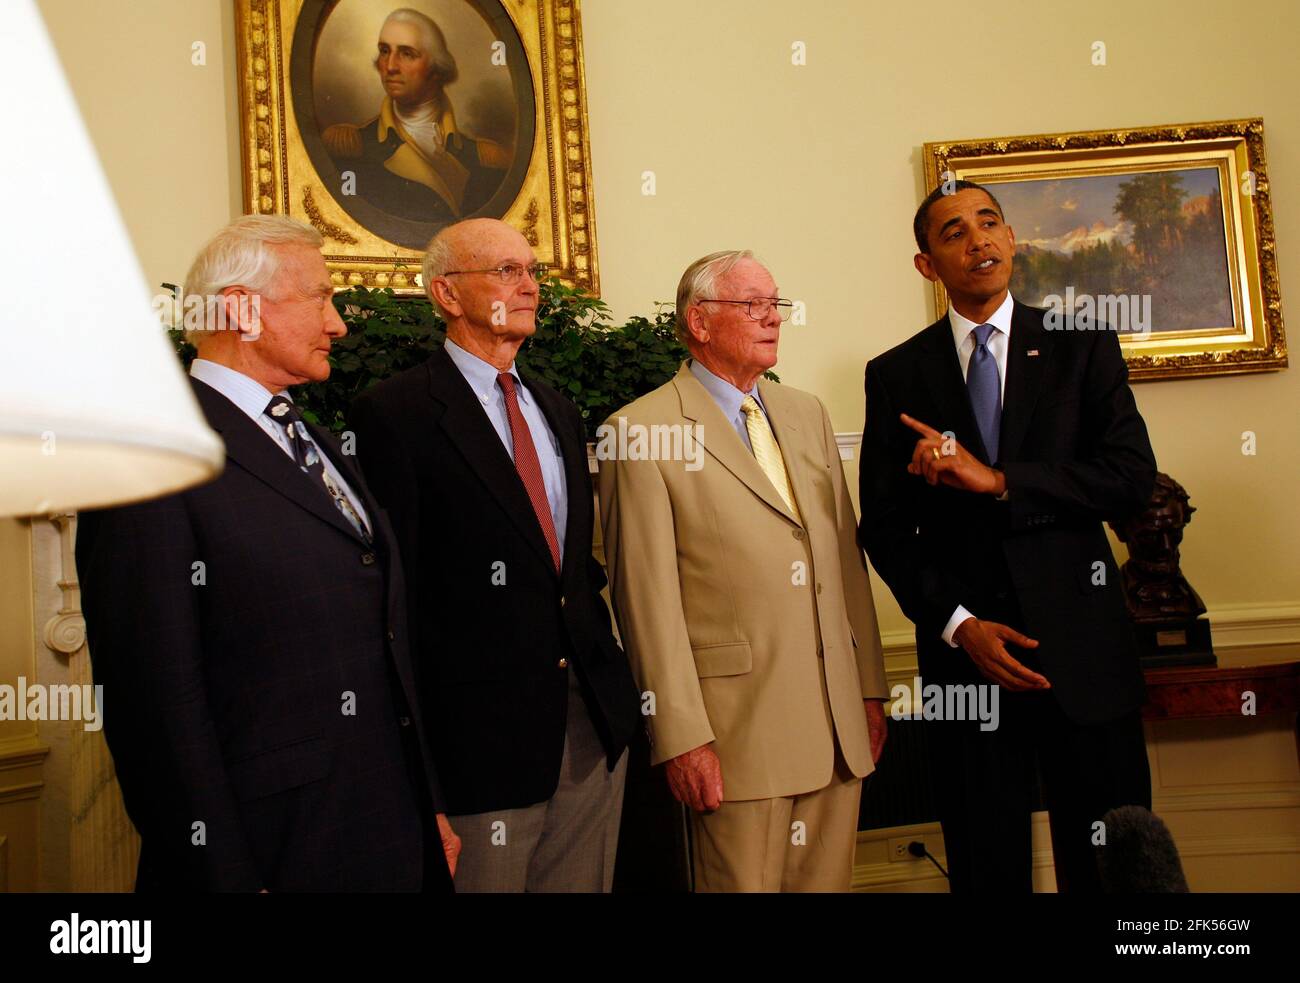 Washington, DC - July 20, 2009 -- United States President Barack Obama meets with Apollo 11 crew members (l-r) Edwin Eugene 'Buzz' Aldrin, Jr., Michael Collins, and Neil Armstrong in the Oval Office of the White House on the 40th anniversary of the astronauts' lunar landing, Washington, DC, Monday, July 20, 2009. Credit: Martin H. Simon/Pool via CNP /MediaPunch Stock Photo